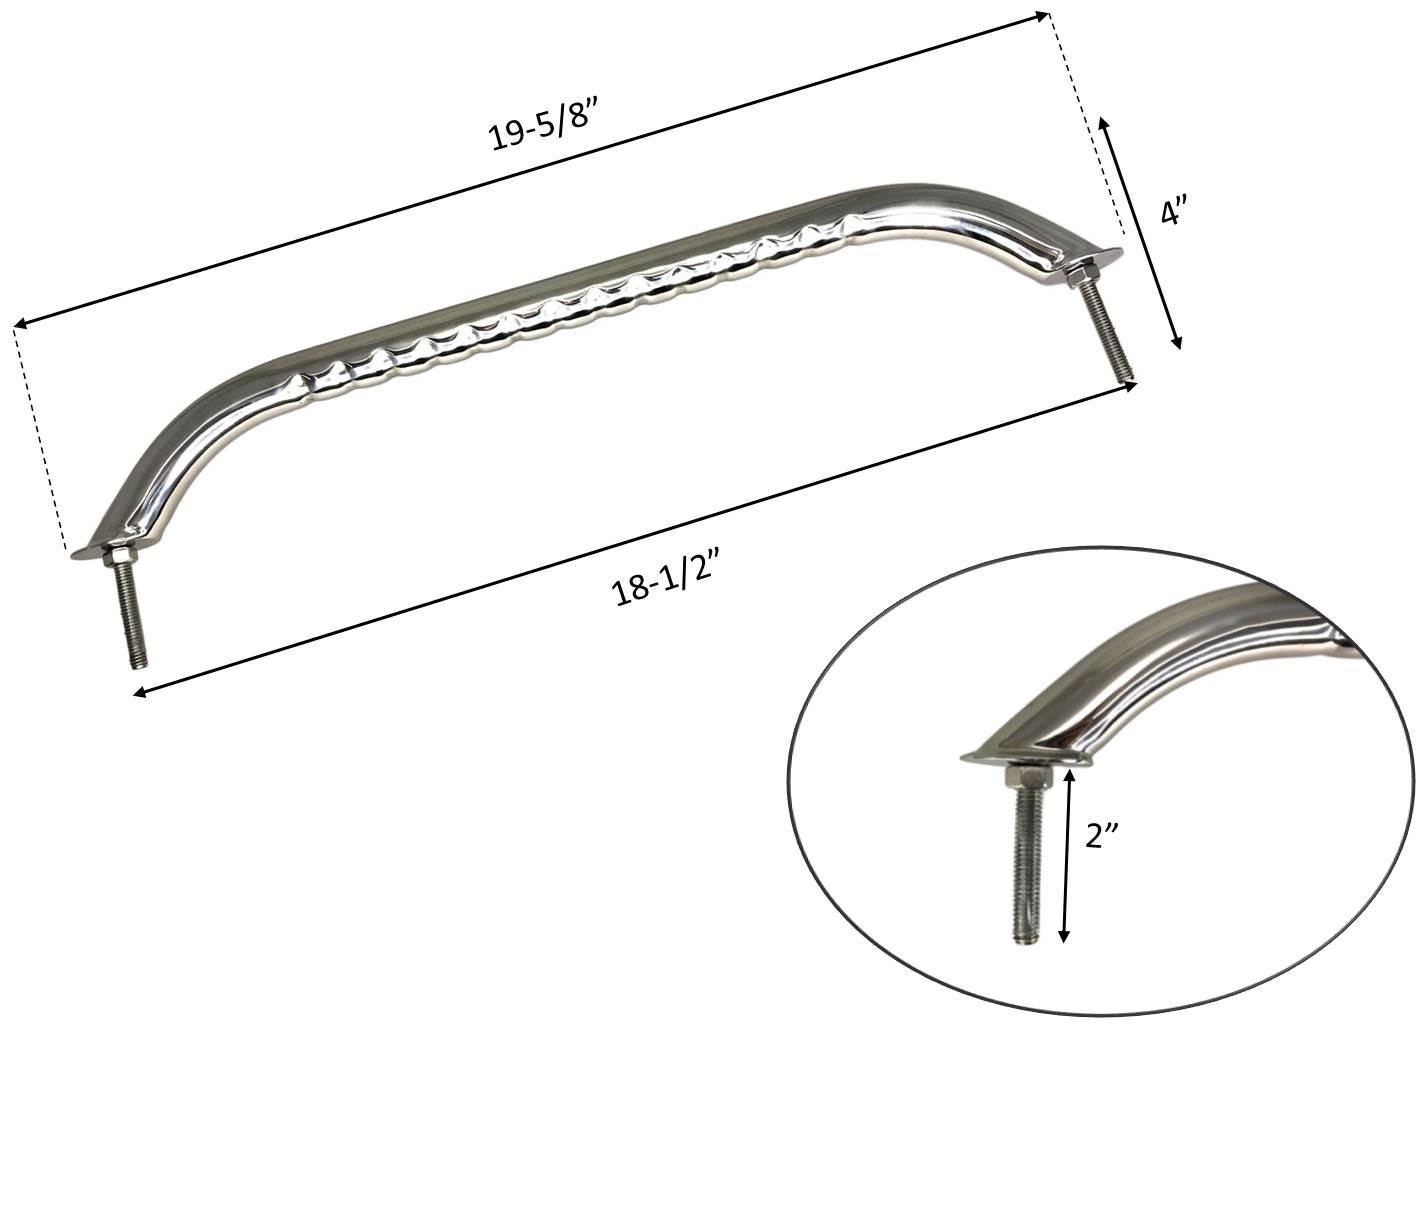 BOAT MARINE STAINLESS STEEL HANDRAIL 18 INCHES WITH WAVE CURVE